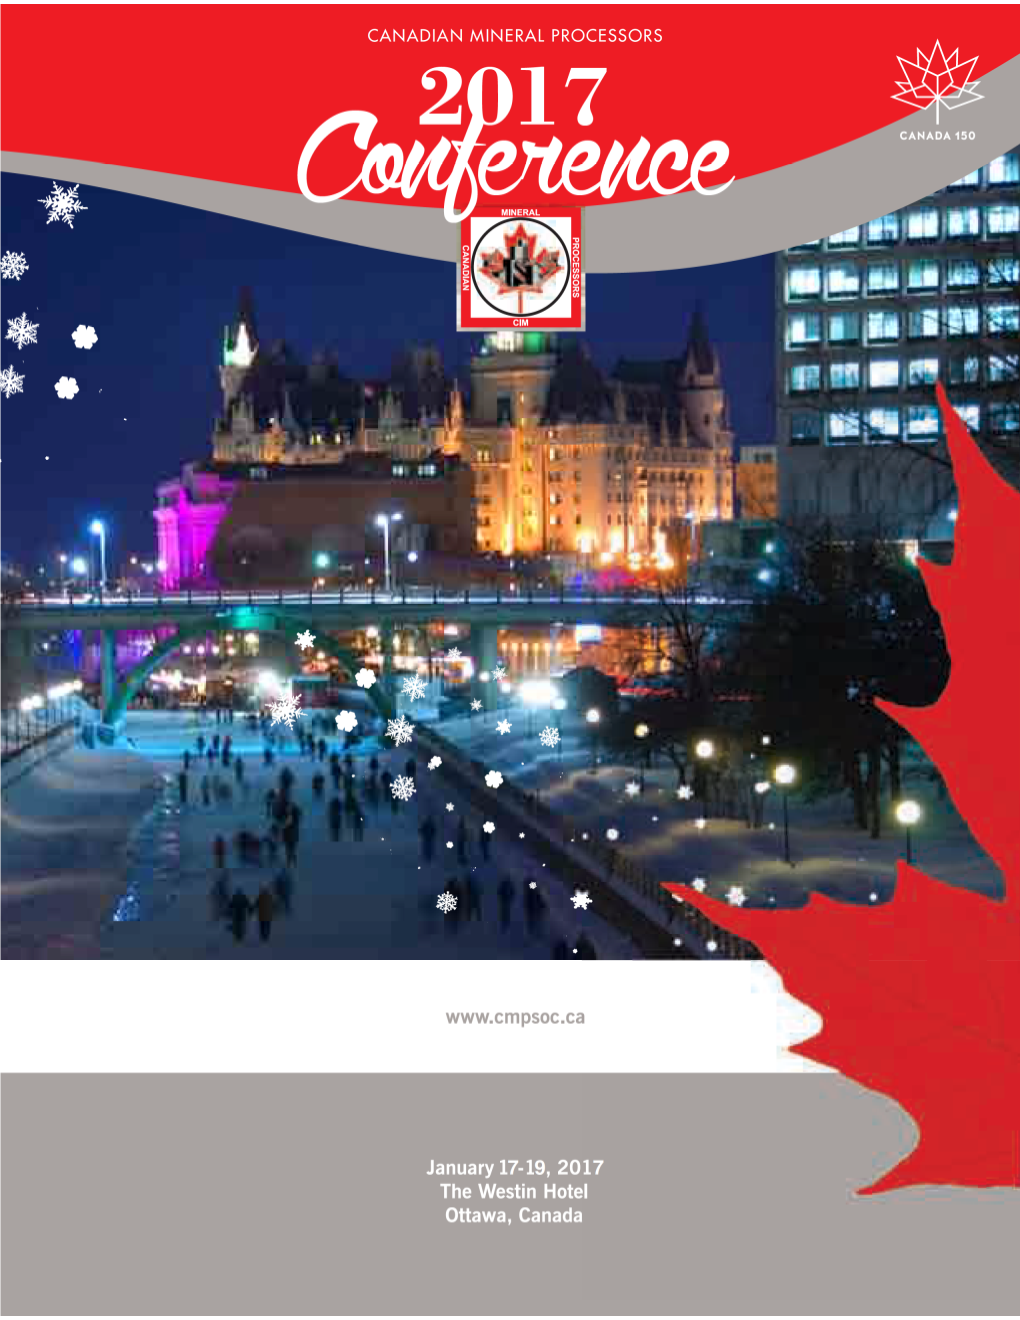 49Th ANNUAL CANADIAN MINERAL PROCESSORS CONFERENCE